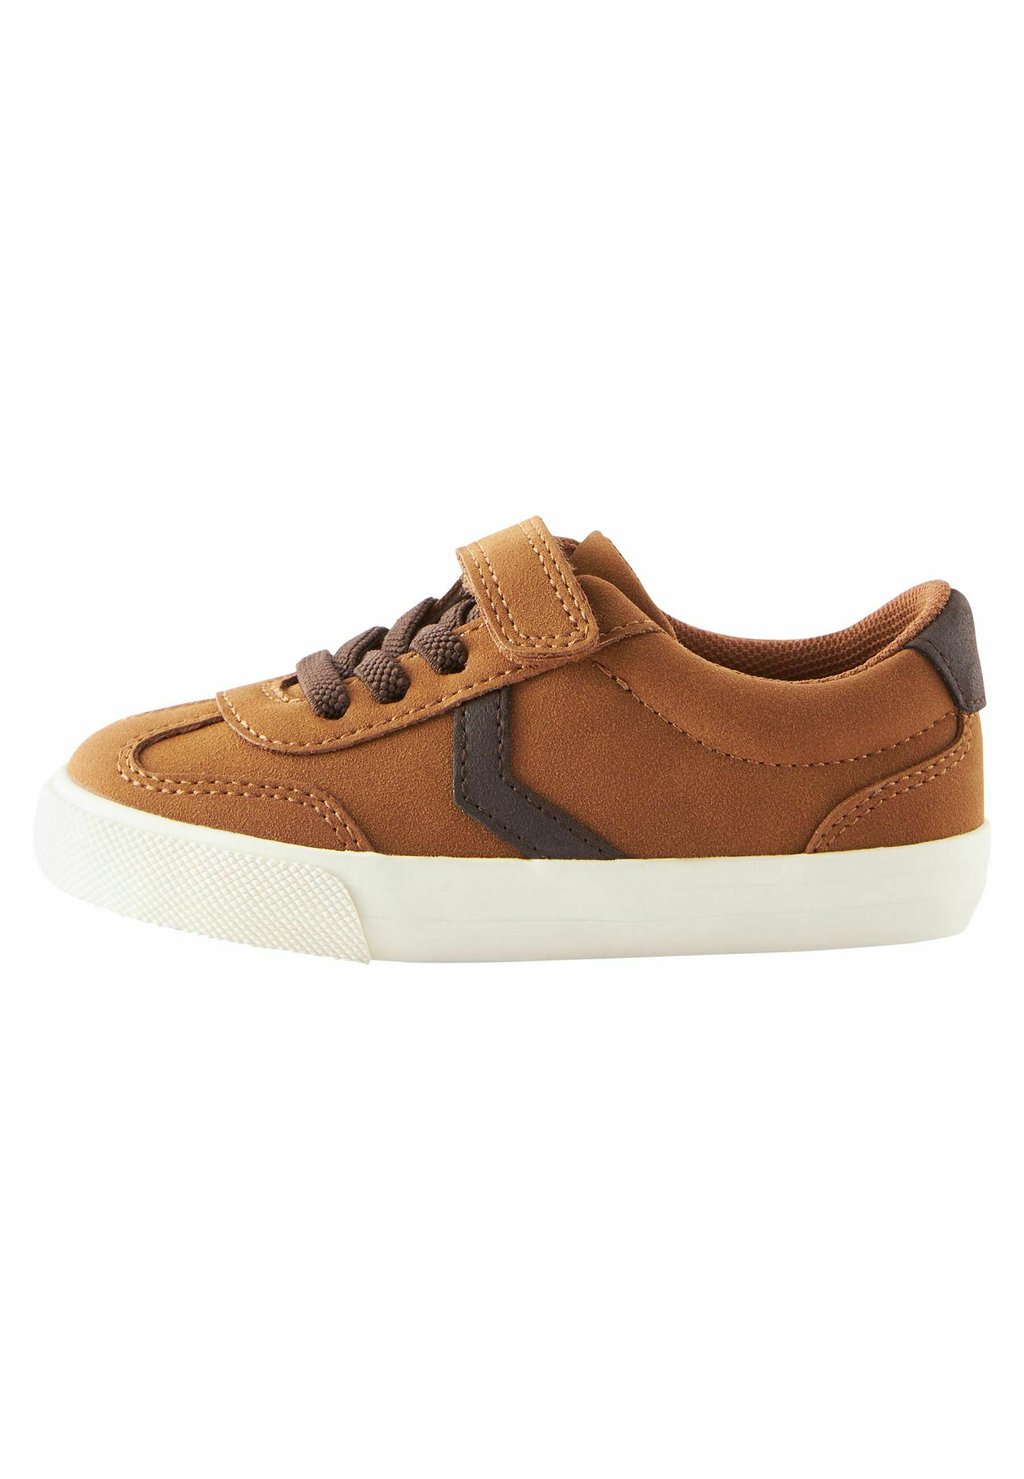 Кроссовки низкие FASTENING Next, цвет tan brown кроссовки next tan perforated trainers brown